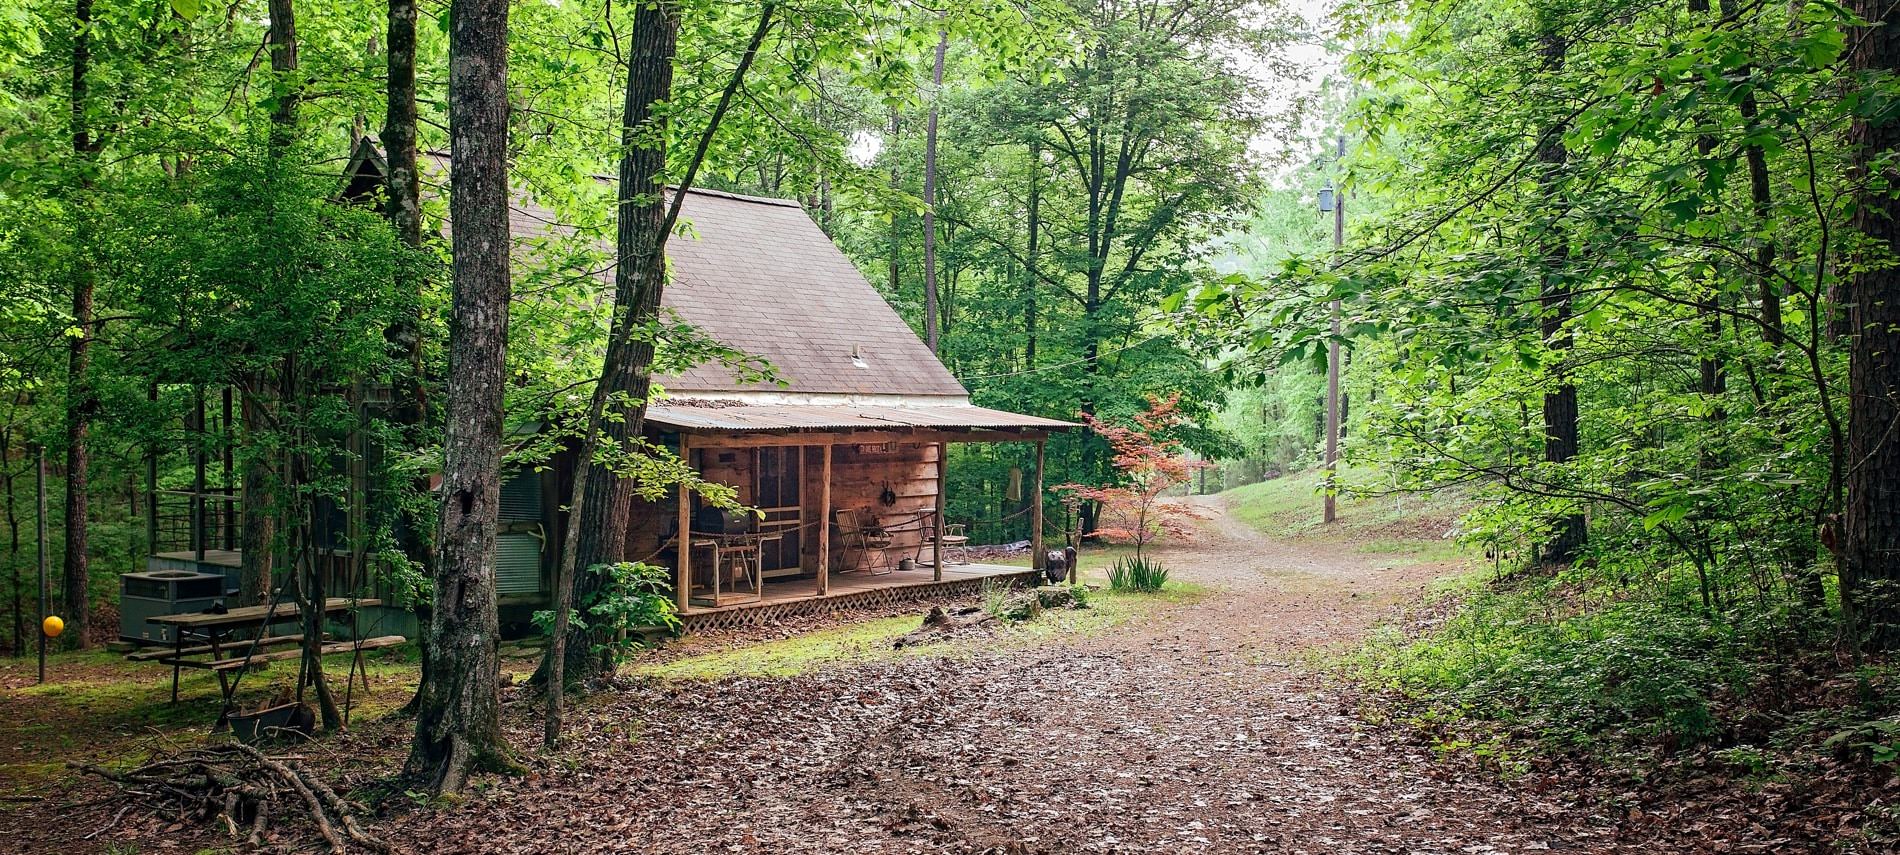 Exterior view of wood cabin surrounded by lush green trees